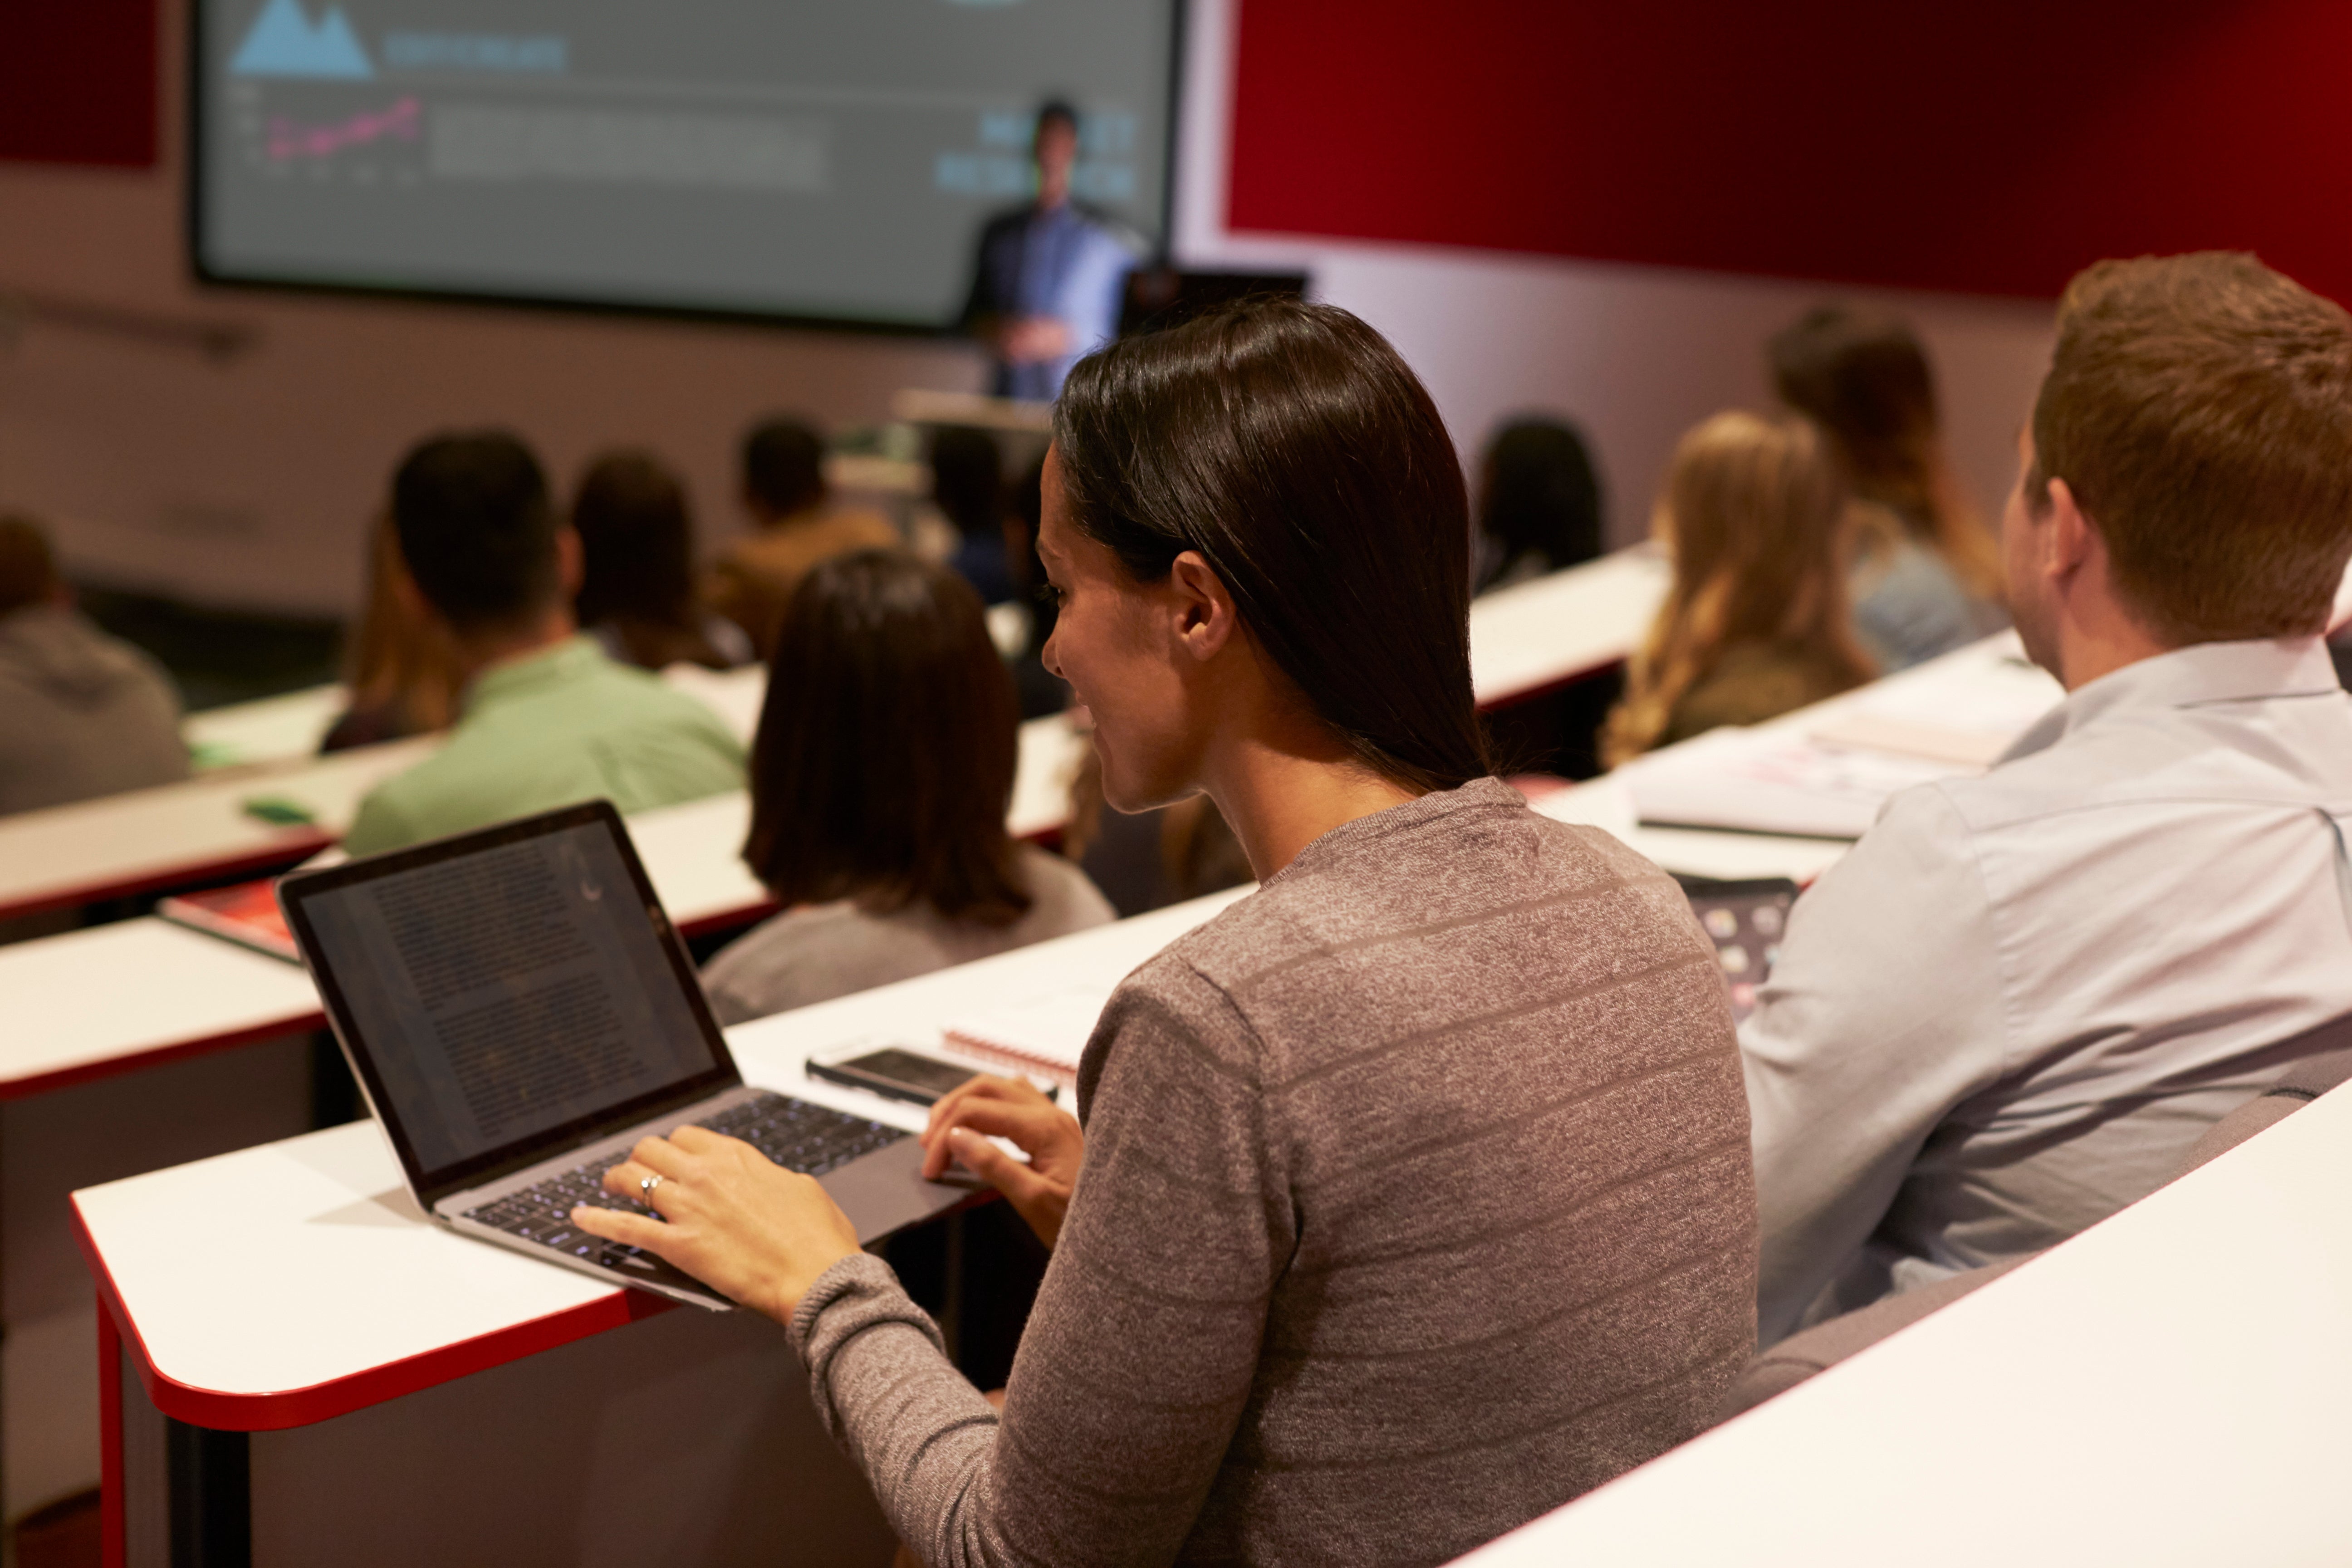 An overwhelming 84.5 per cent of disabled students surveyed said that they would benefit from online or distance teaching being an option after the pandemic